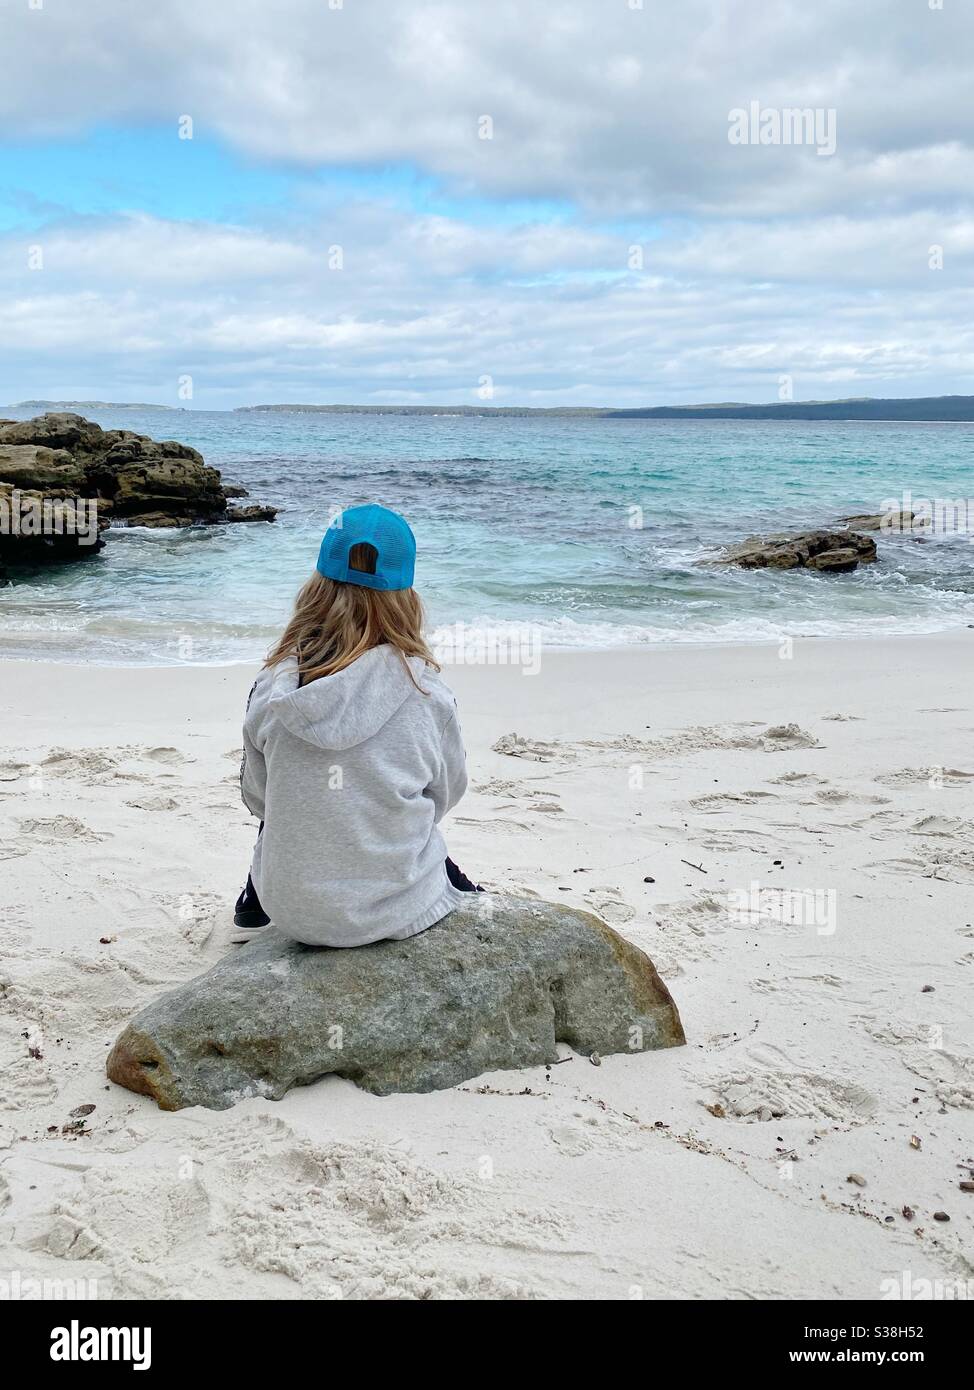 Young girl with long hair, wearing cap and hoodie sits on rock on white sandy beach looking out to sea. Concept of wanderlust, isolation, dreaming and peacefulness. Stock Photo